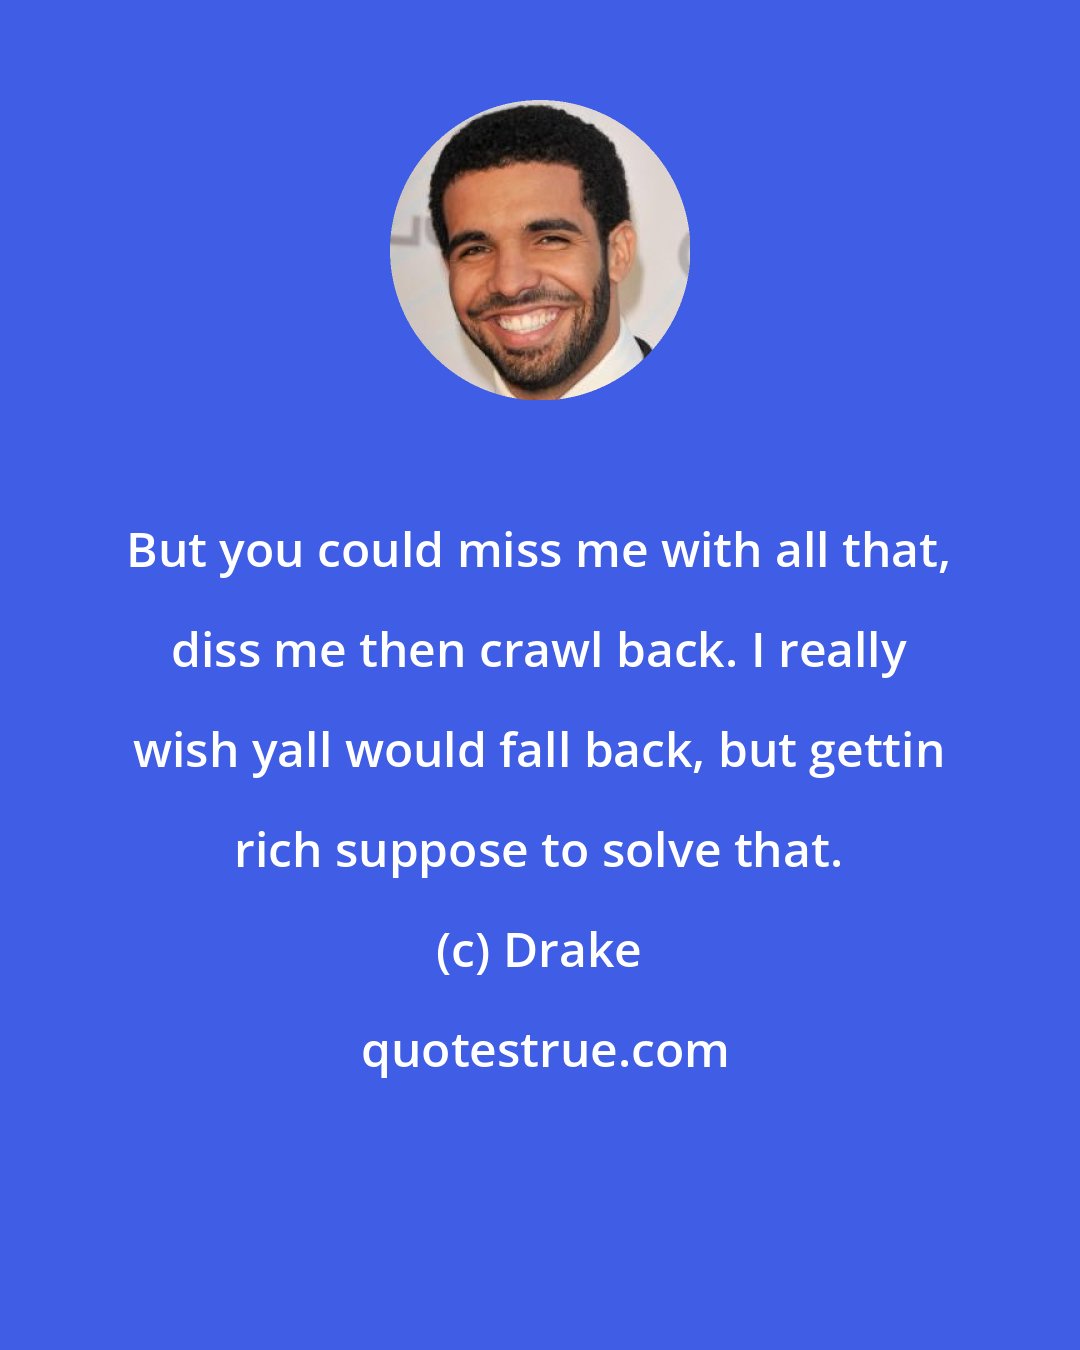 Drake: But you could miss me with all that, diss me then crawl back. I really wish yall would fall back, but gettin rich suppose to solve that.